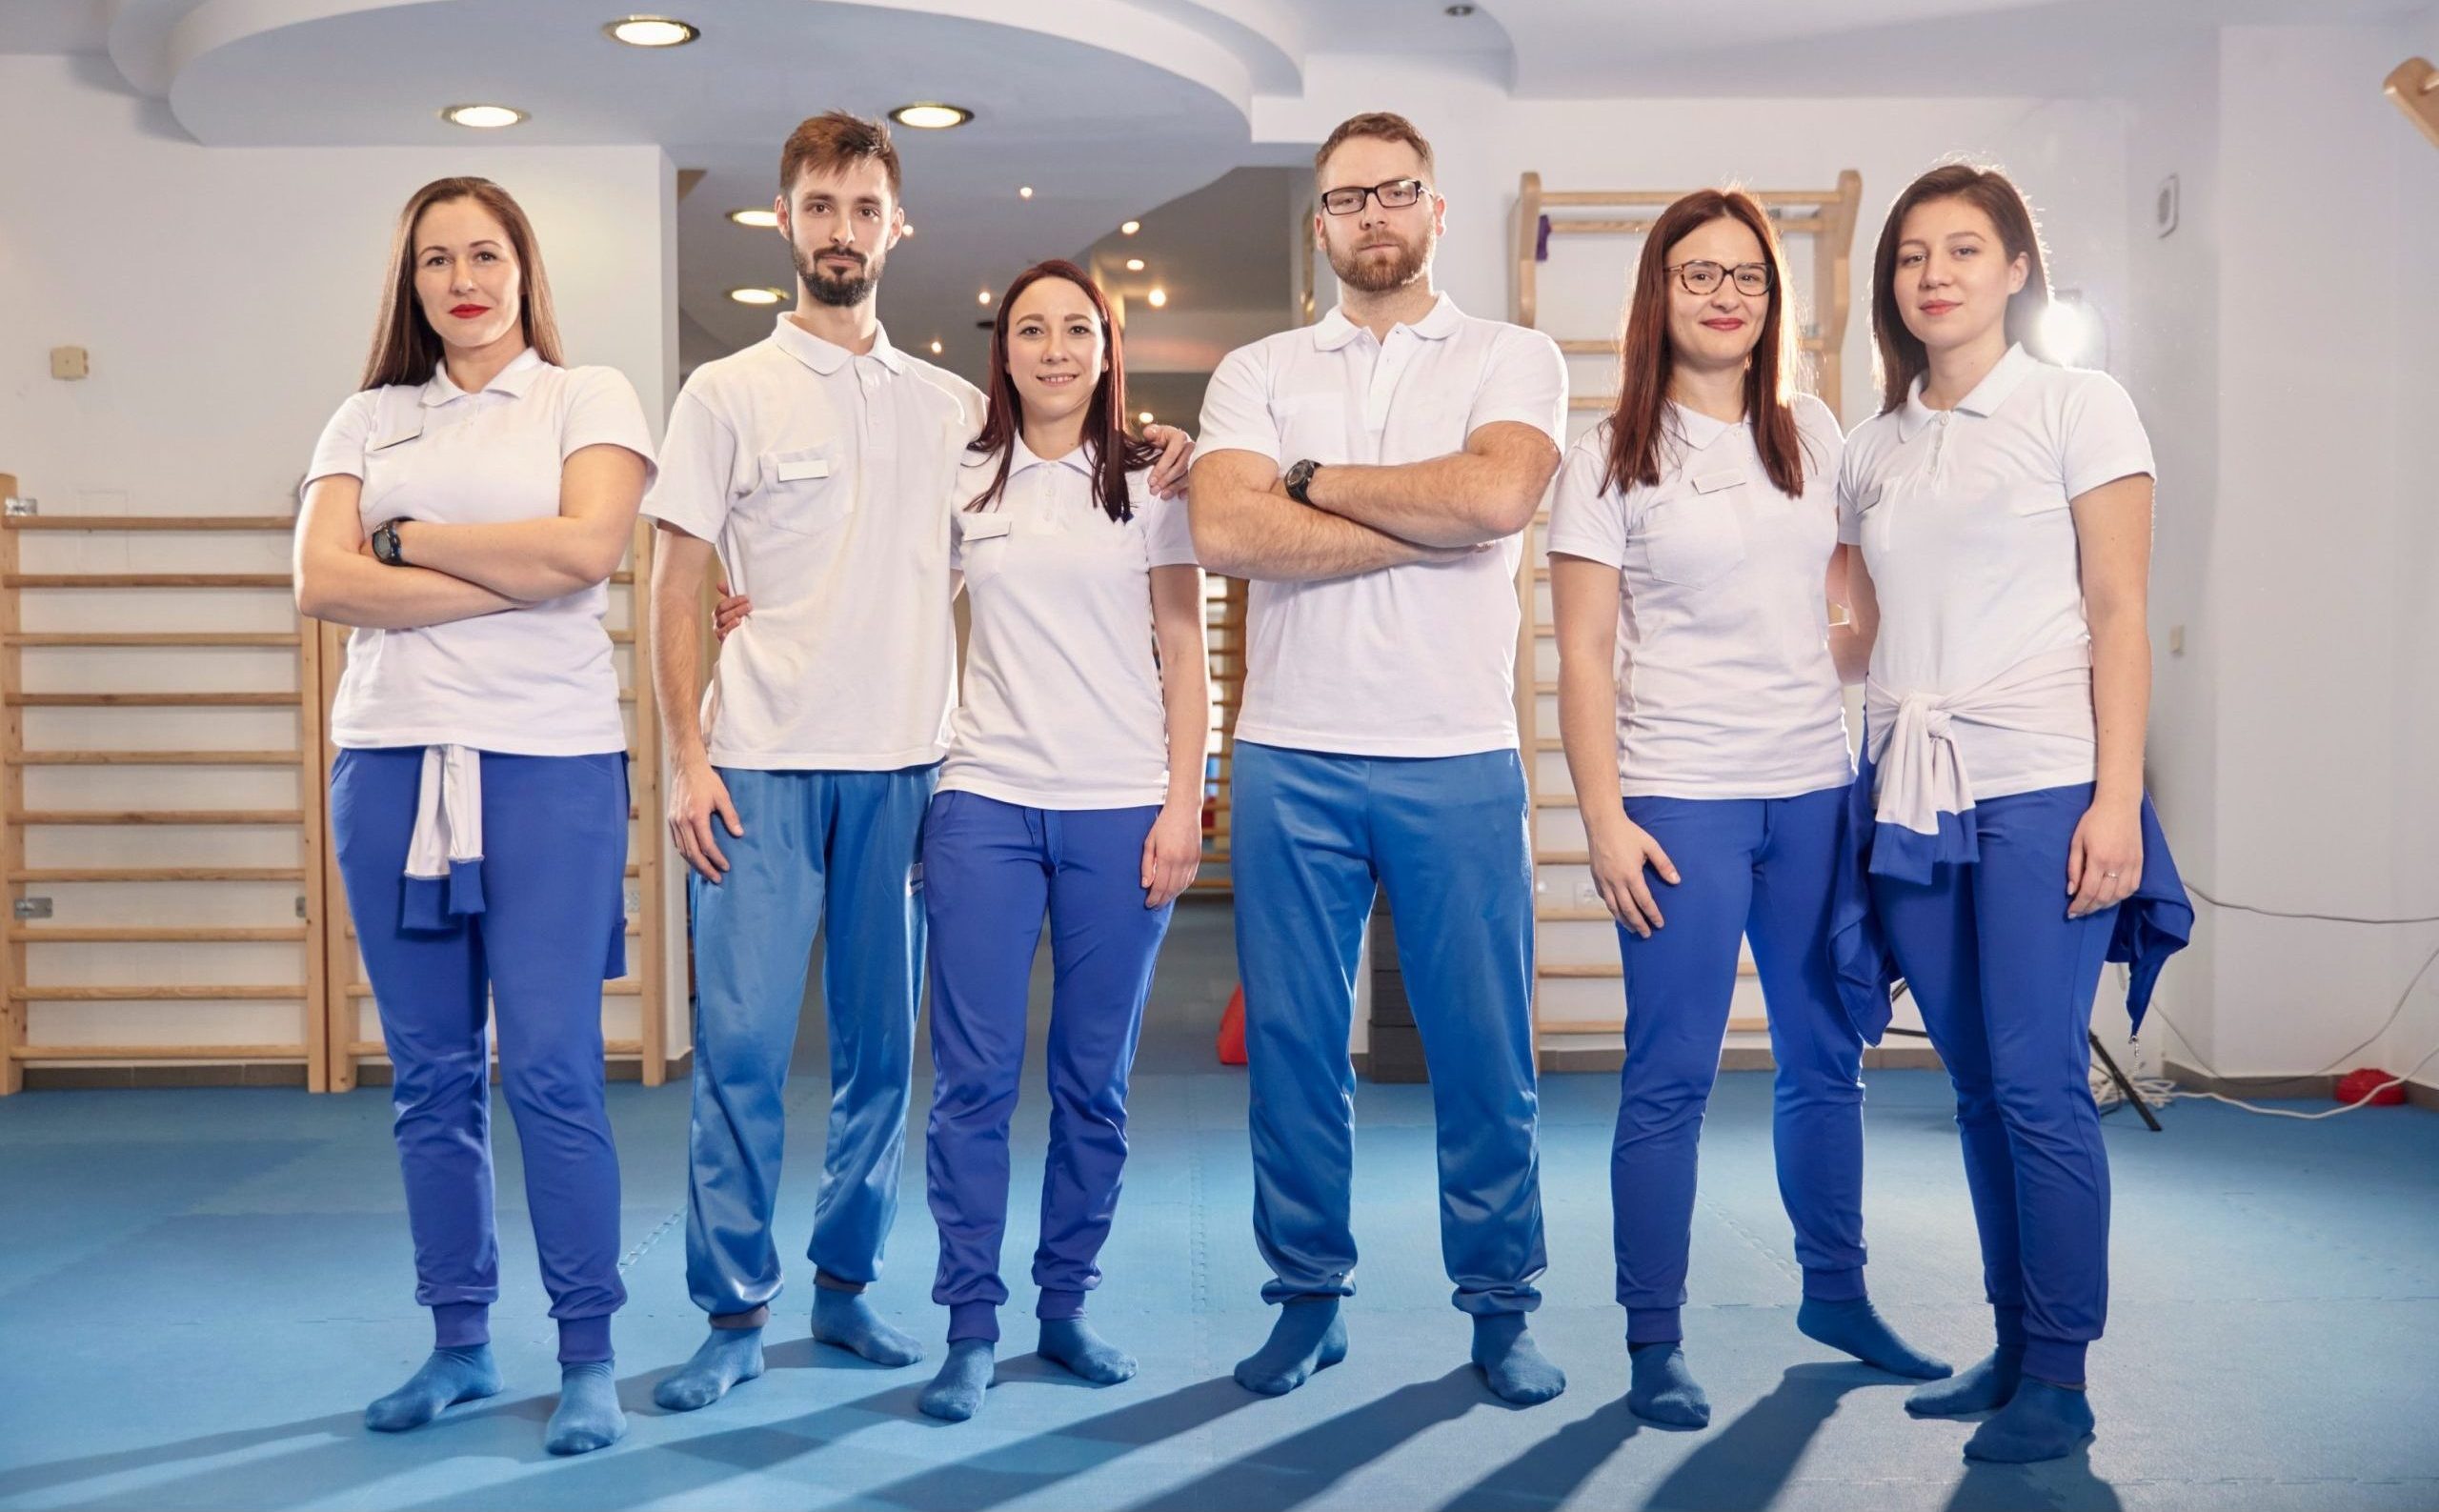 Team of physical therapists